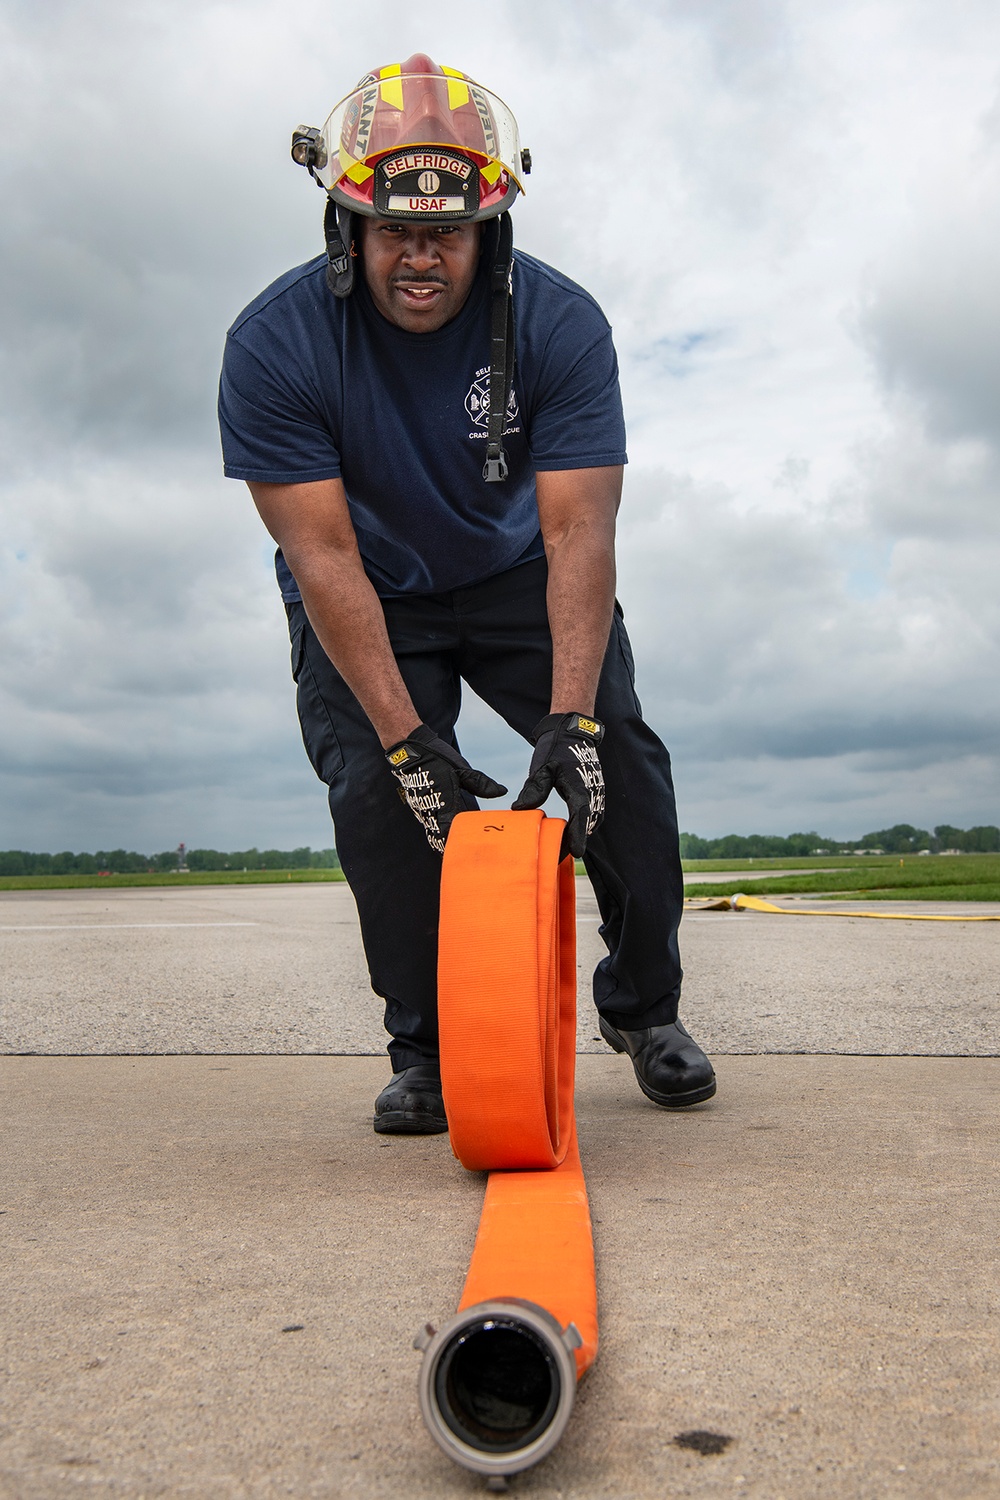 127th Wing Fire Fighters inspect equipment